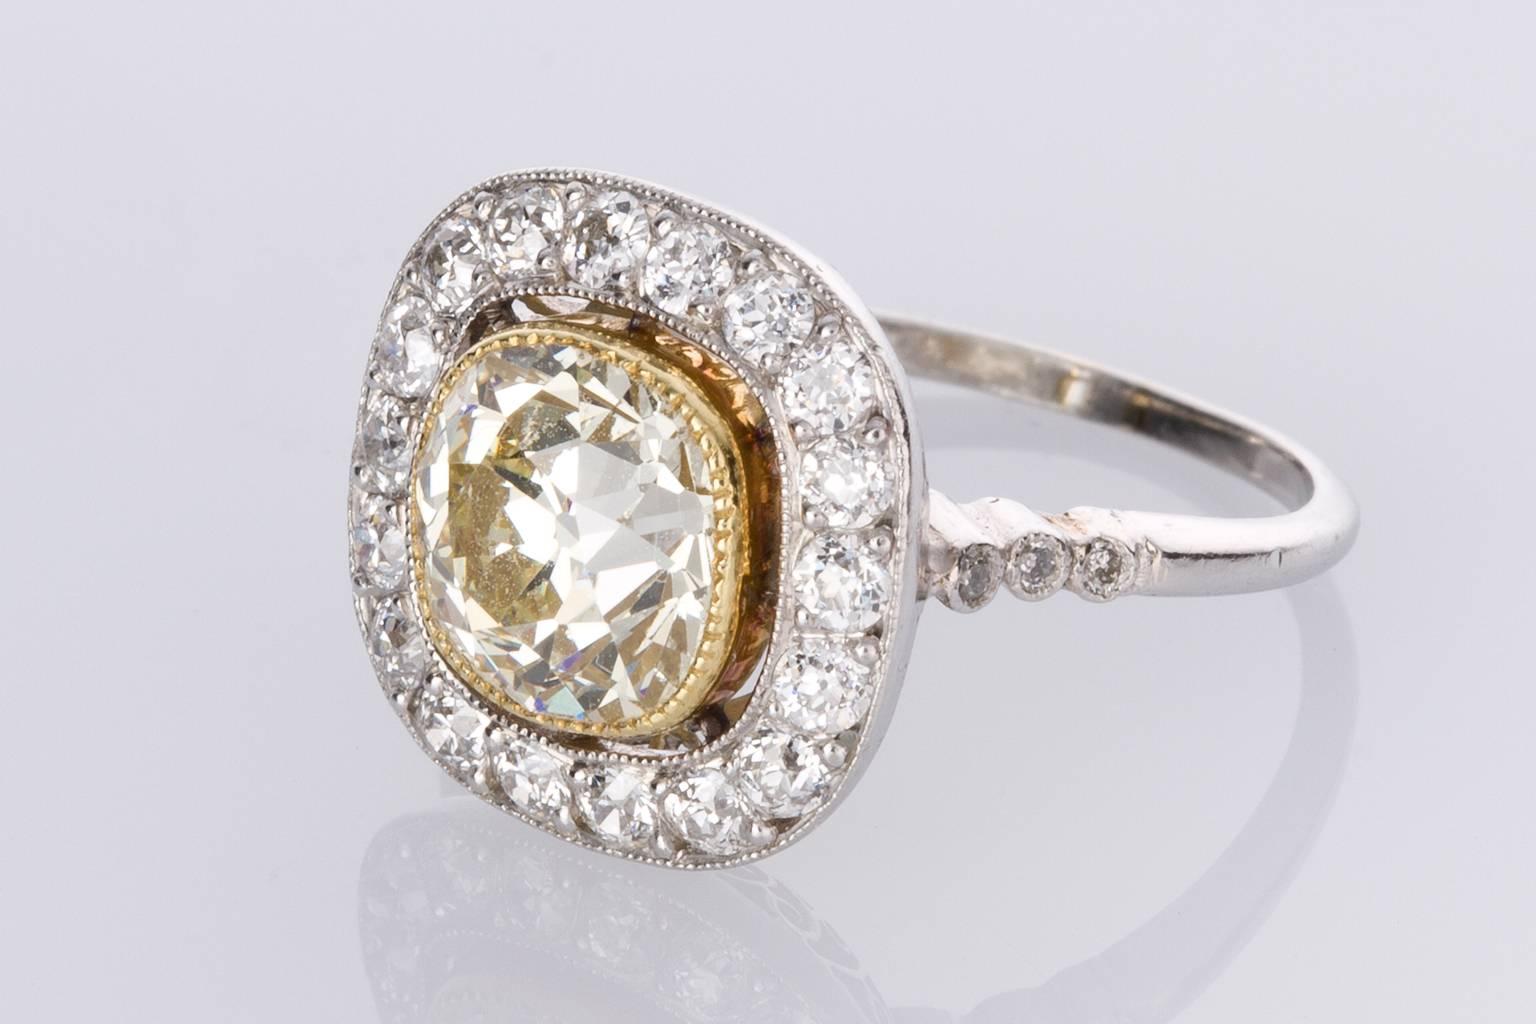 A stunning Art Deco style engagement ring featuring one central old cut fancy light yellow coloured diamond weighing approximately 1.83cts mounted within a fine millegrain floating frame of 18k yellow gold and surrounded with 23 round brilliant cut